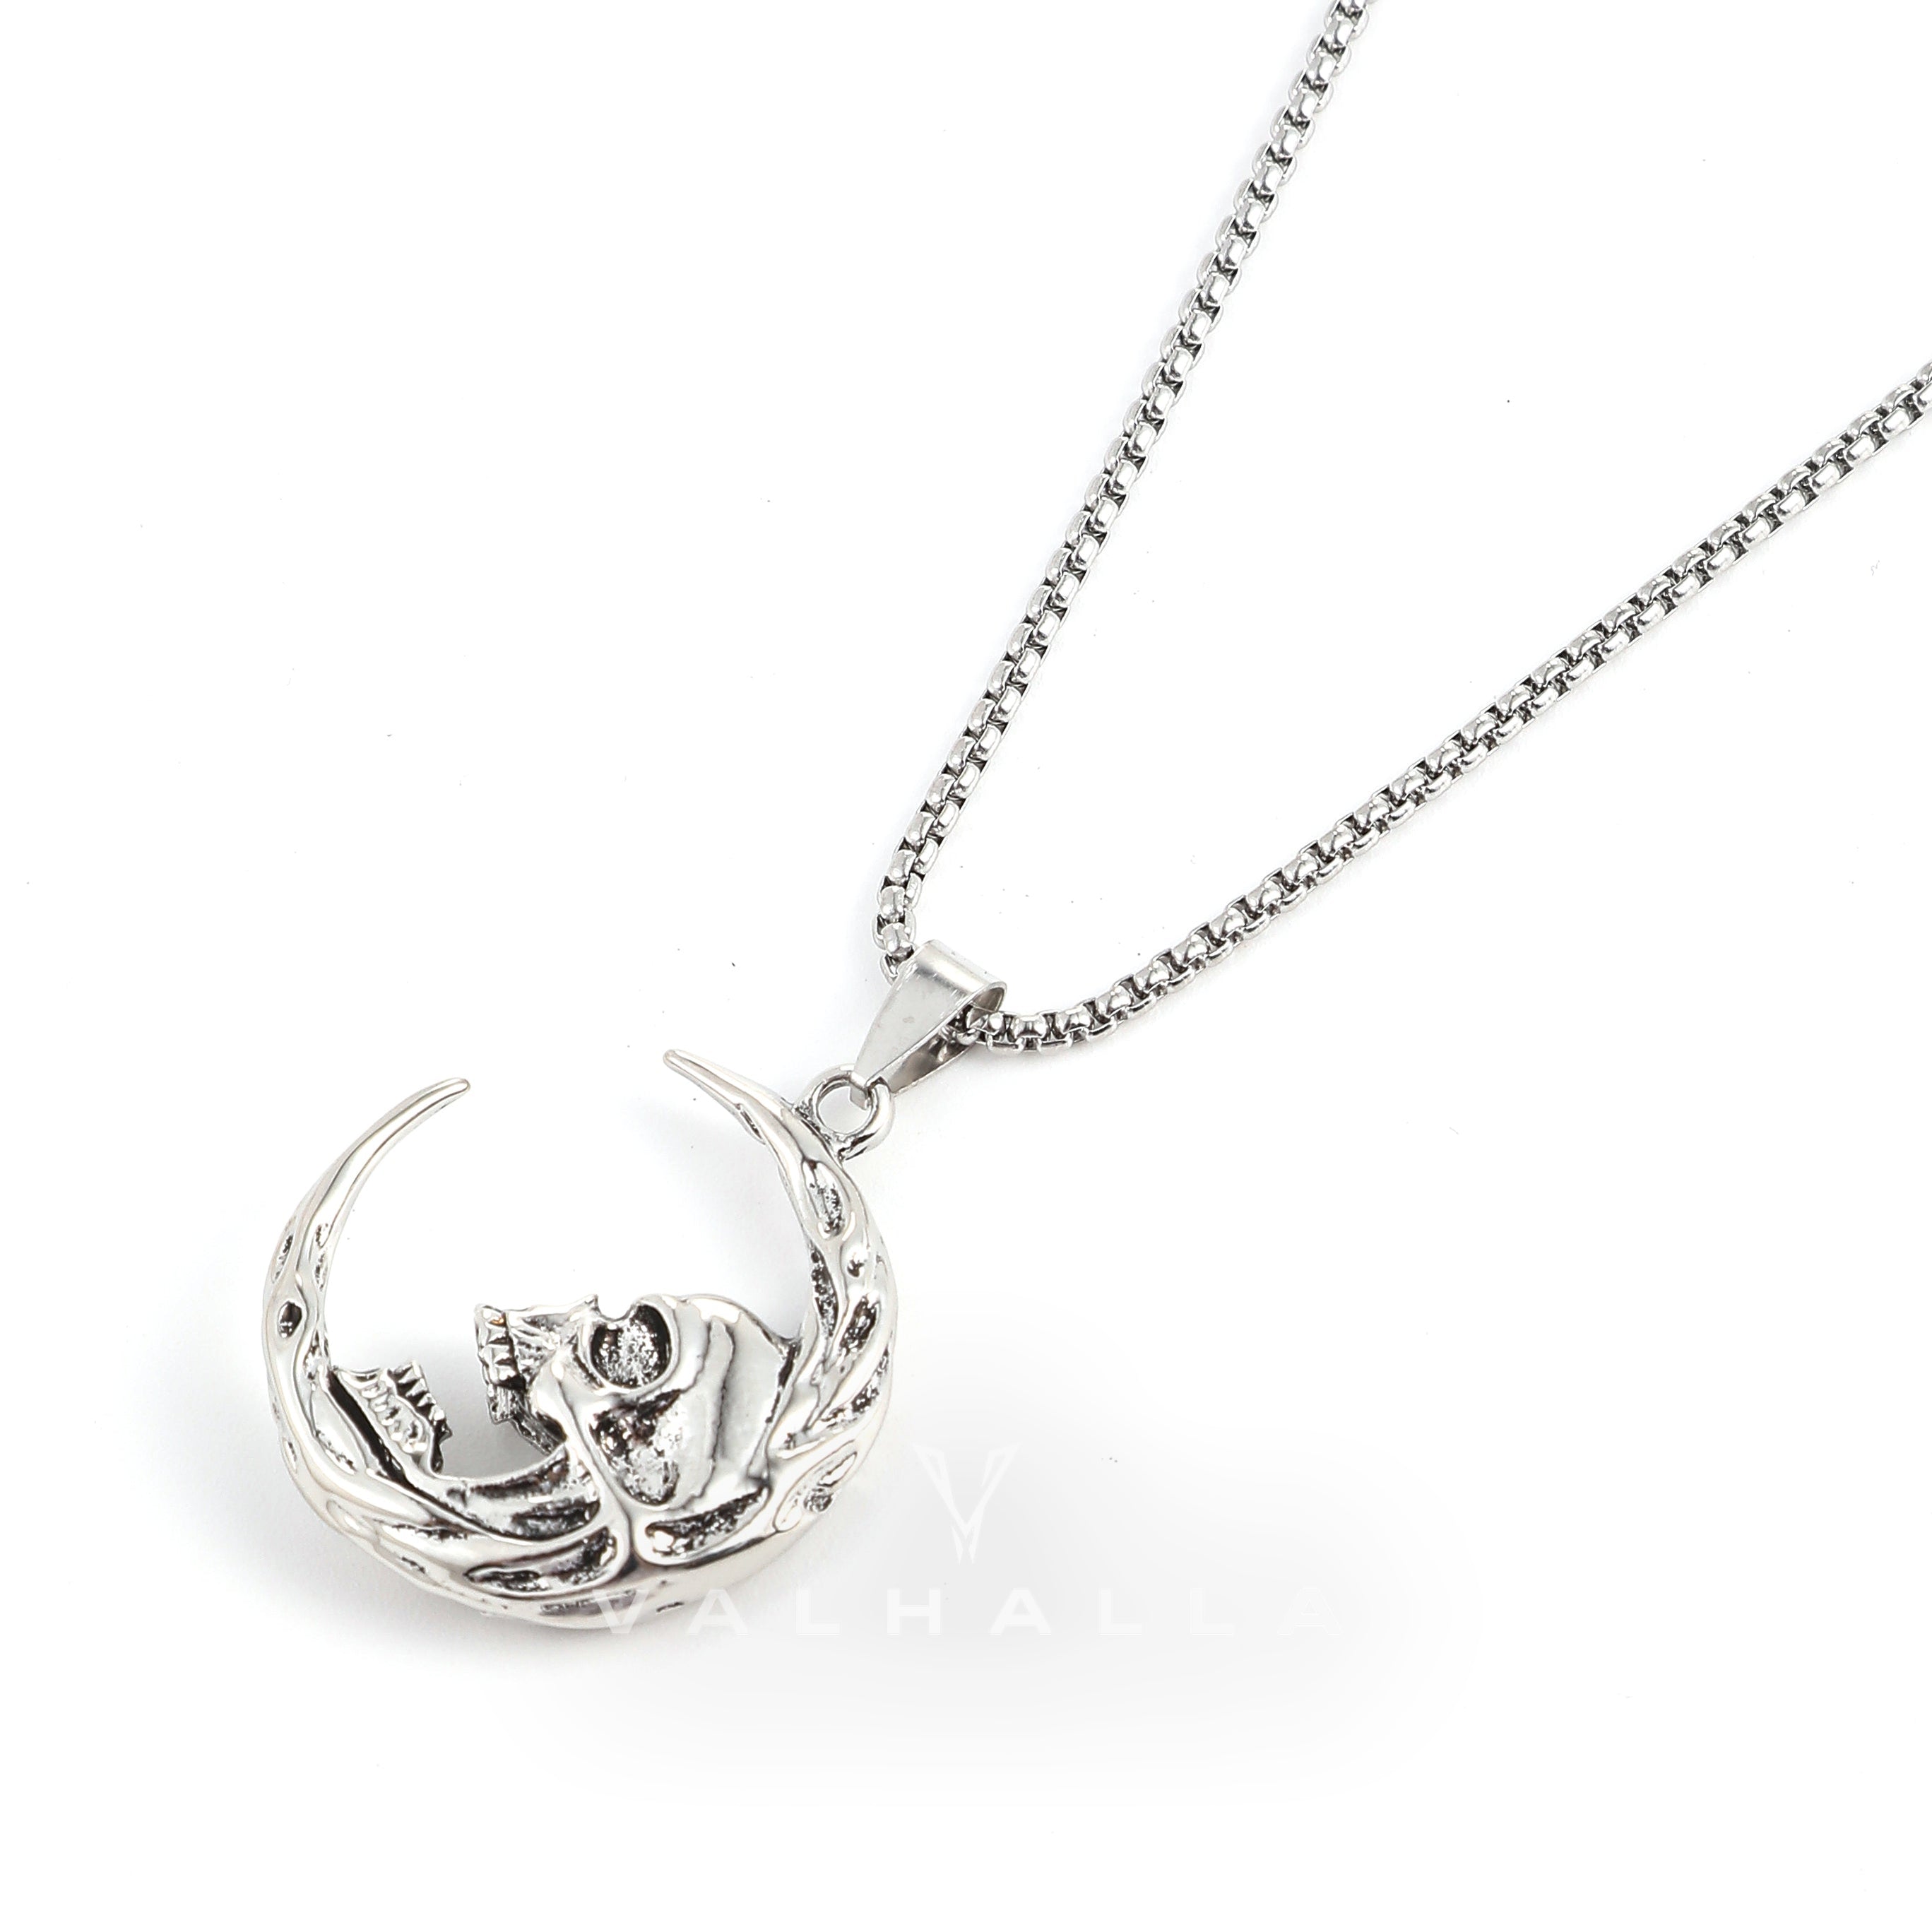 The Skull of Waning Moon Stainless Steel Necklace